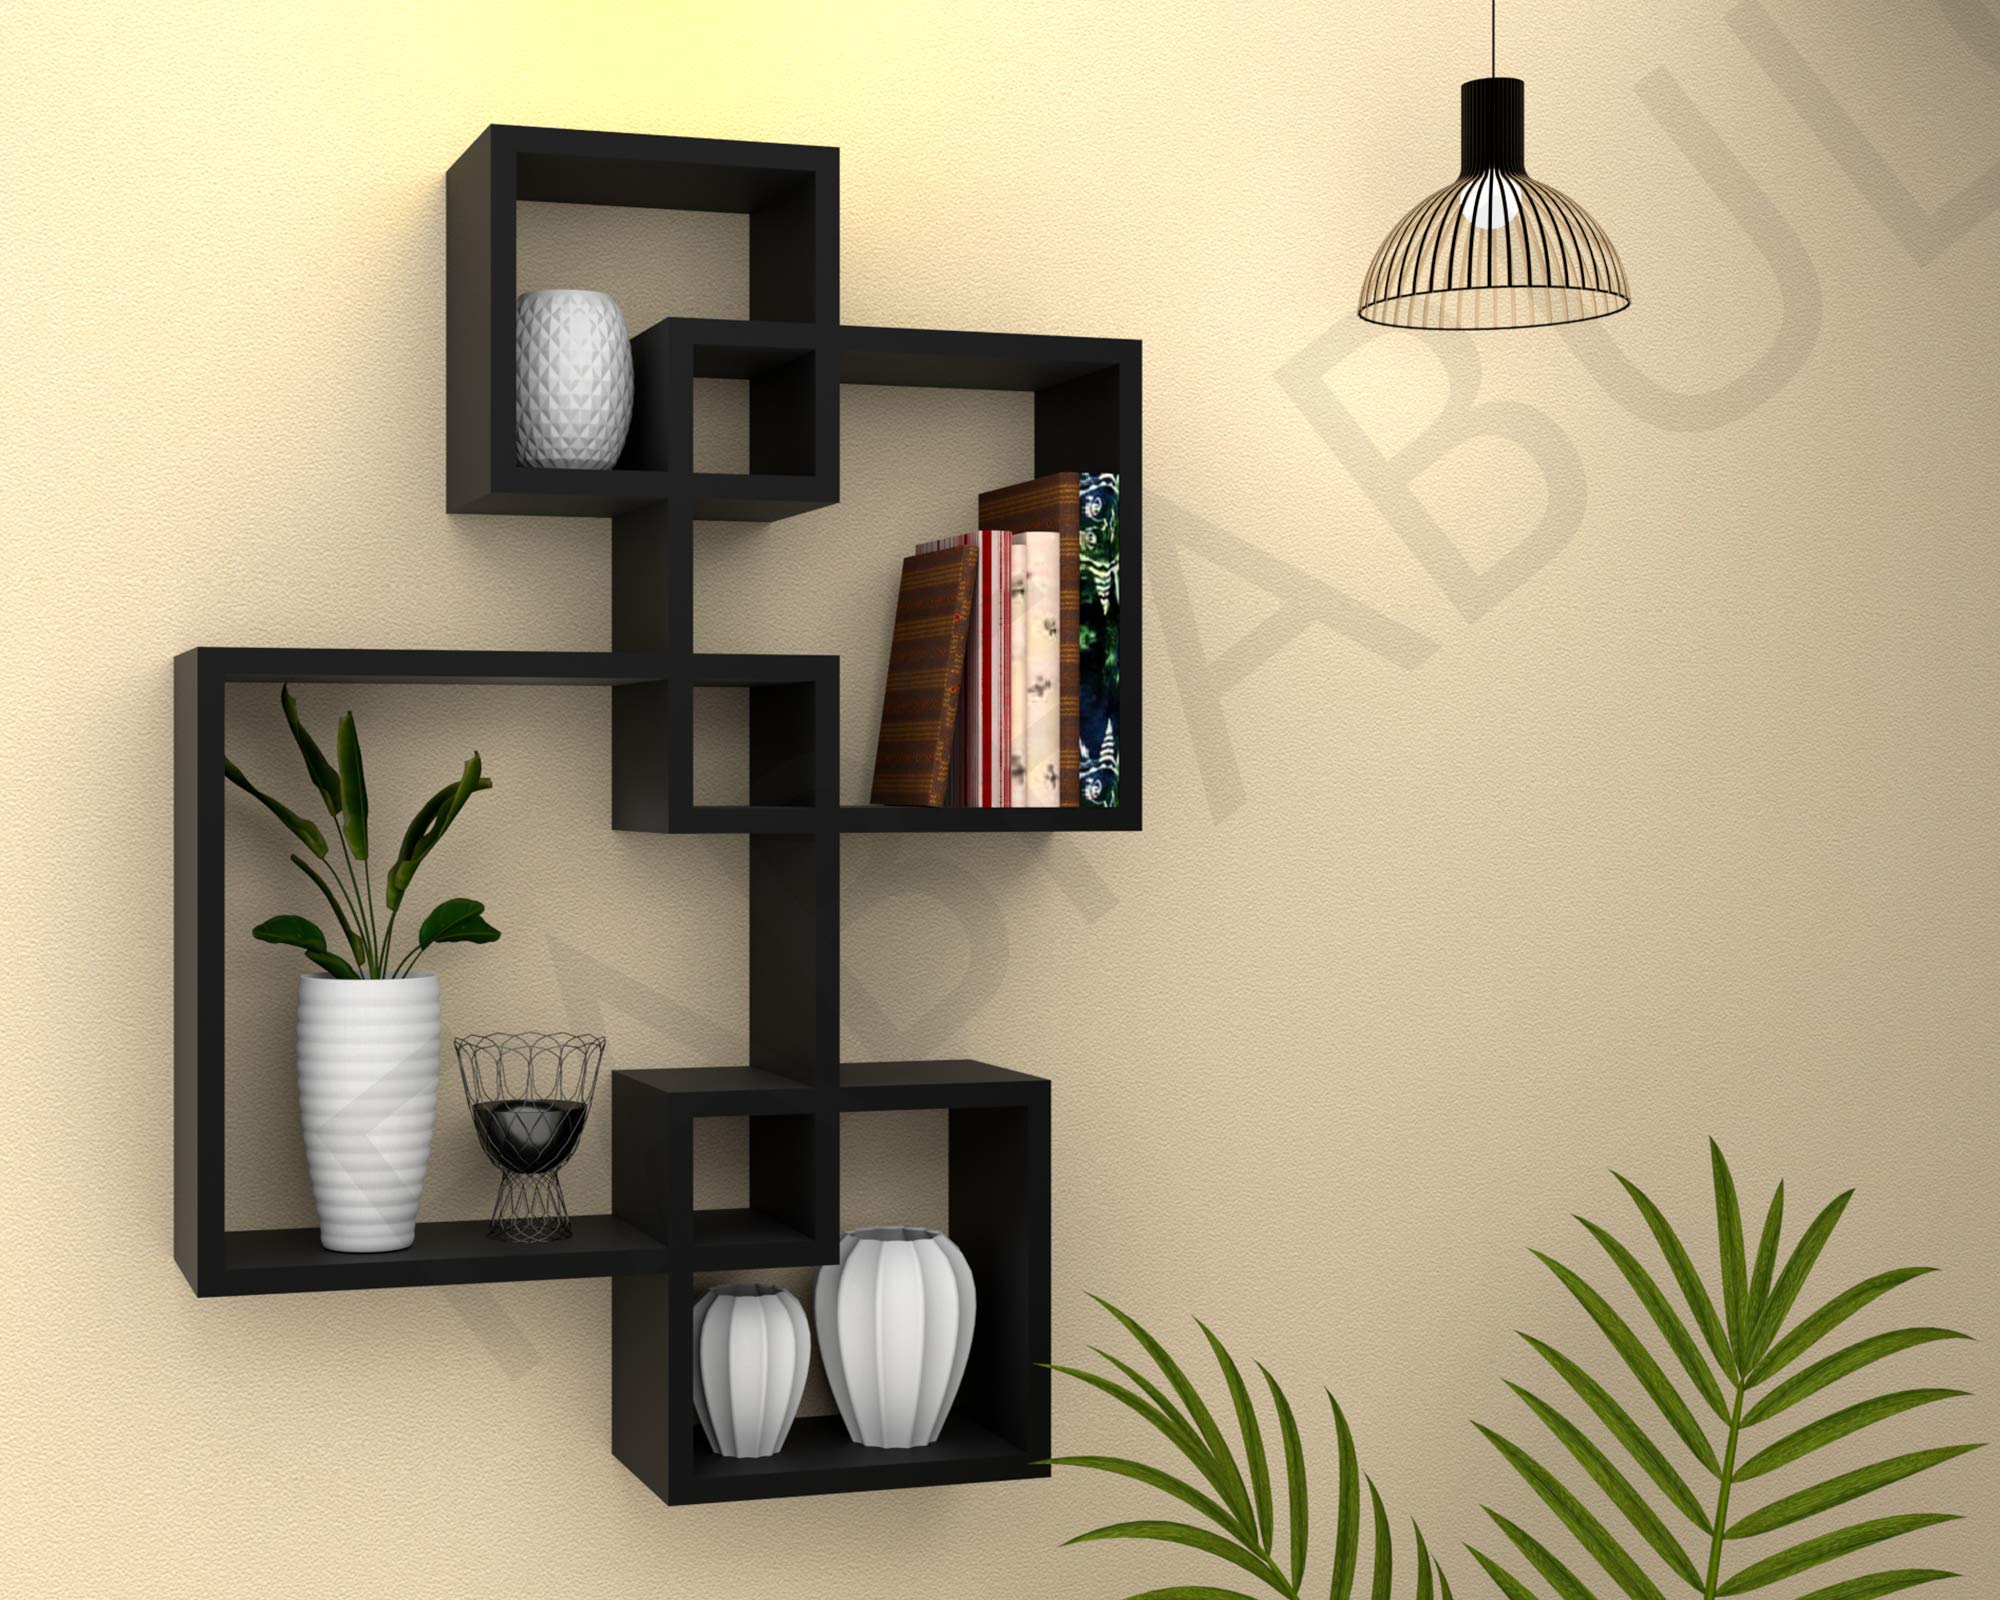  Maximizing Space and Style: How to Design Your Living Room with a Modern Wall Rack